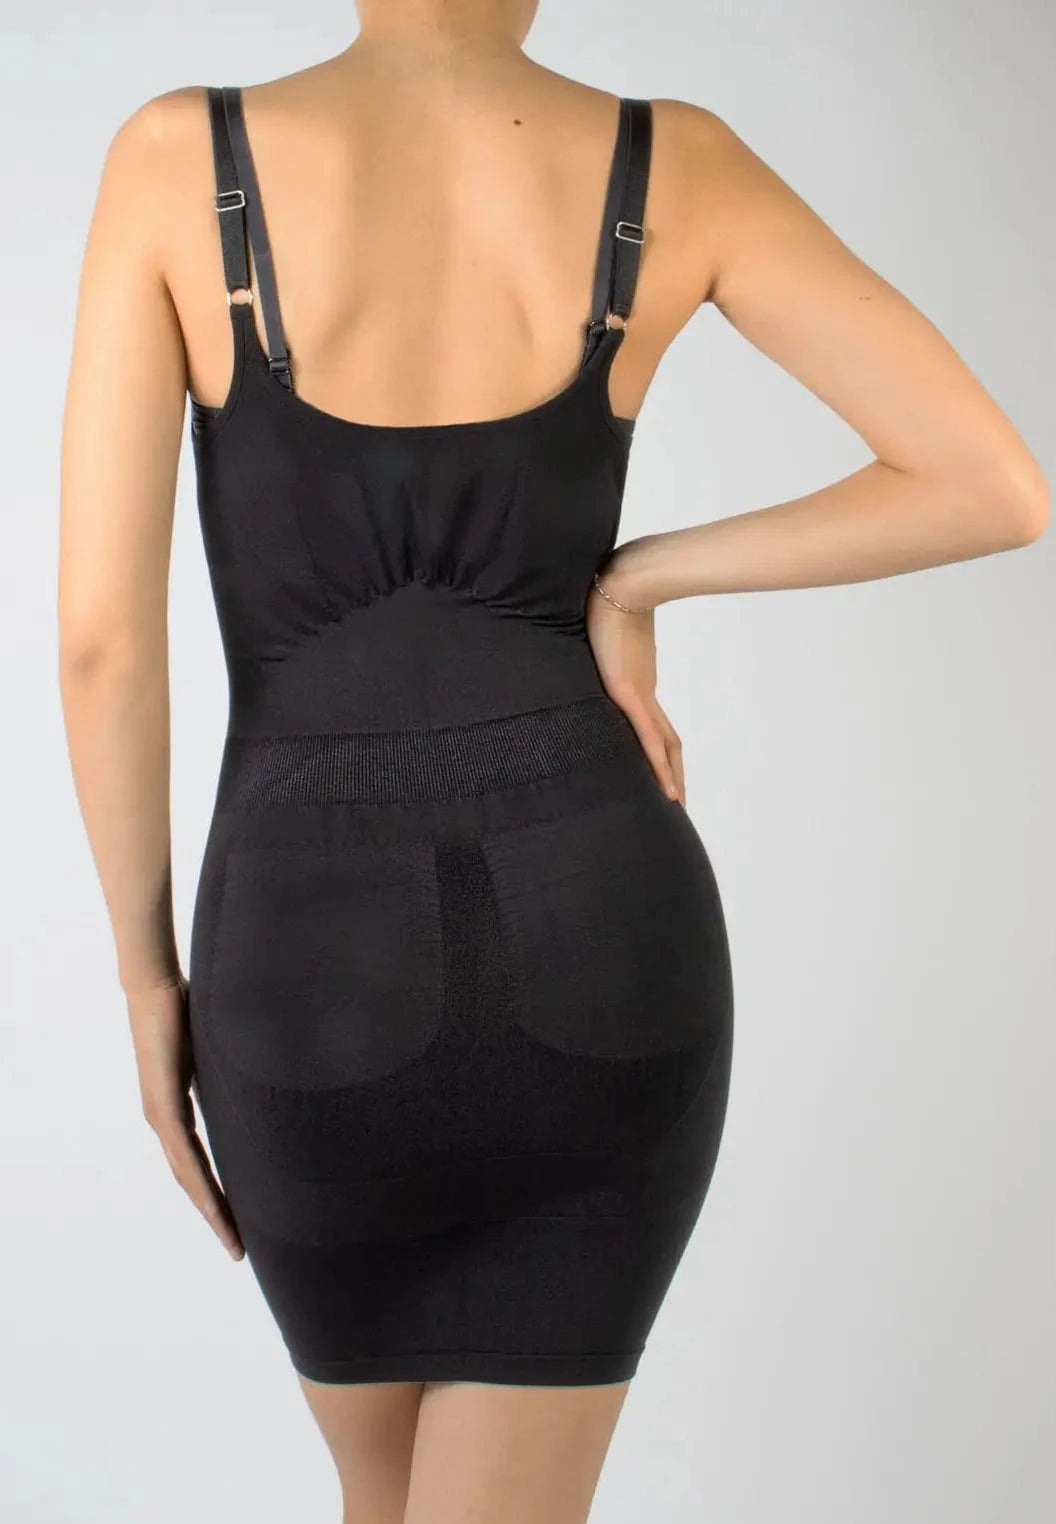 Cette Body Shape Dress - Black soft and invisible seamless 'all in one' frontless shaping slip dress with adjustable straps, scooped front and back, it helps to slim the tummy, shape the hips and pushes up the bum.